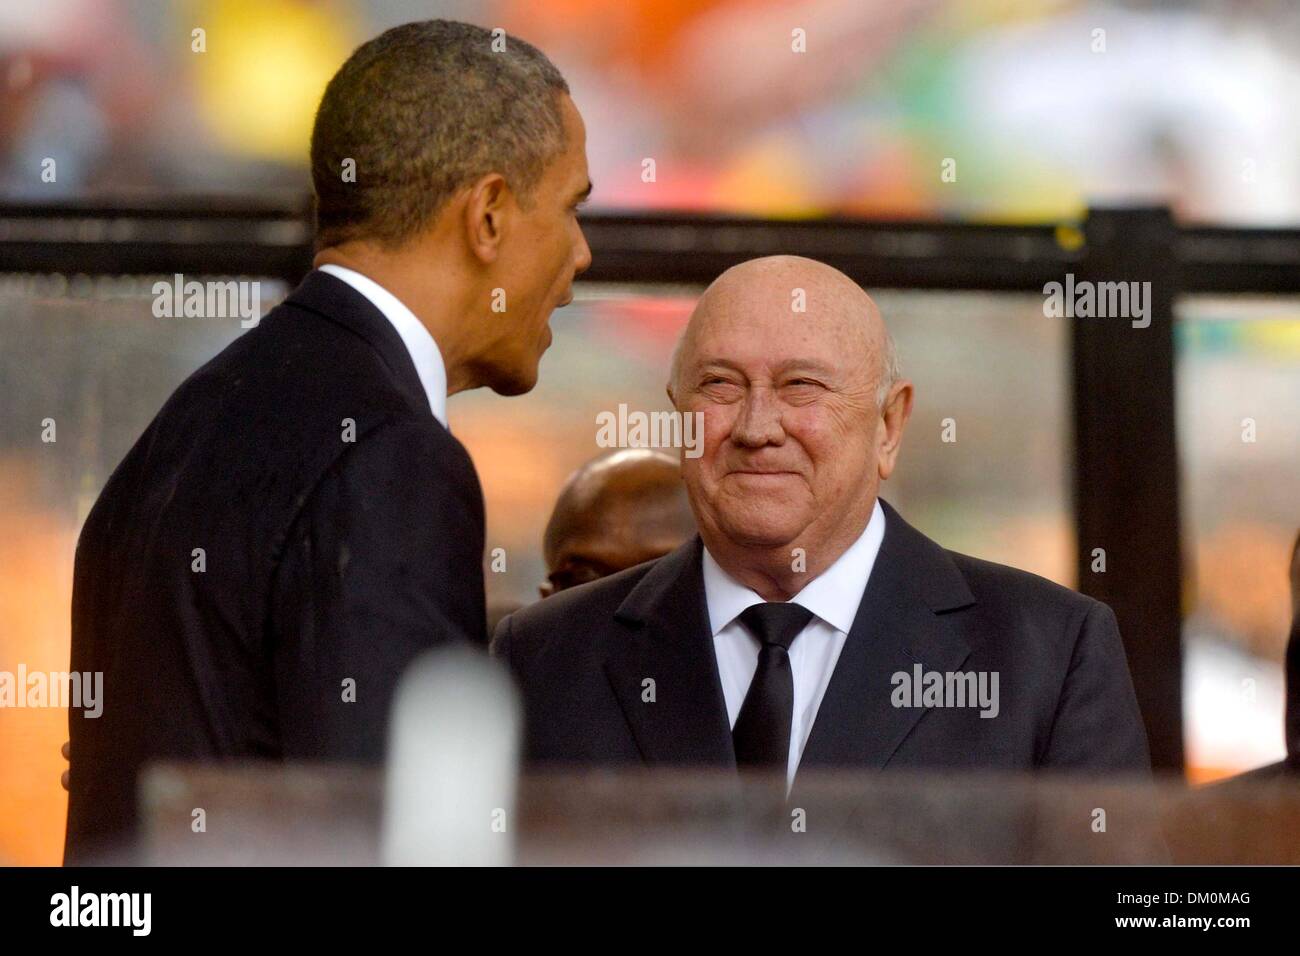 Johannesburg, South Africa. 10th Dec, 2013.  US President Barak Obama and FW De Klerk attending Nelson Mandela's public Memorial Service at the FNB stadium on December 10, 2013, in Johannesburg, South Africa. The Father of the Nation passed away quietly on the evening of December 5, 2013 at his home in Houghton with family. He will be buried in Qunu for the official State funeral on December 15, 2013. Credit:  Gallo images/Alamy Live News Stock Photo